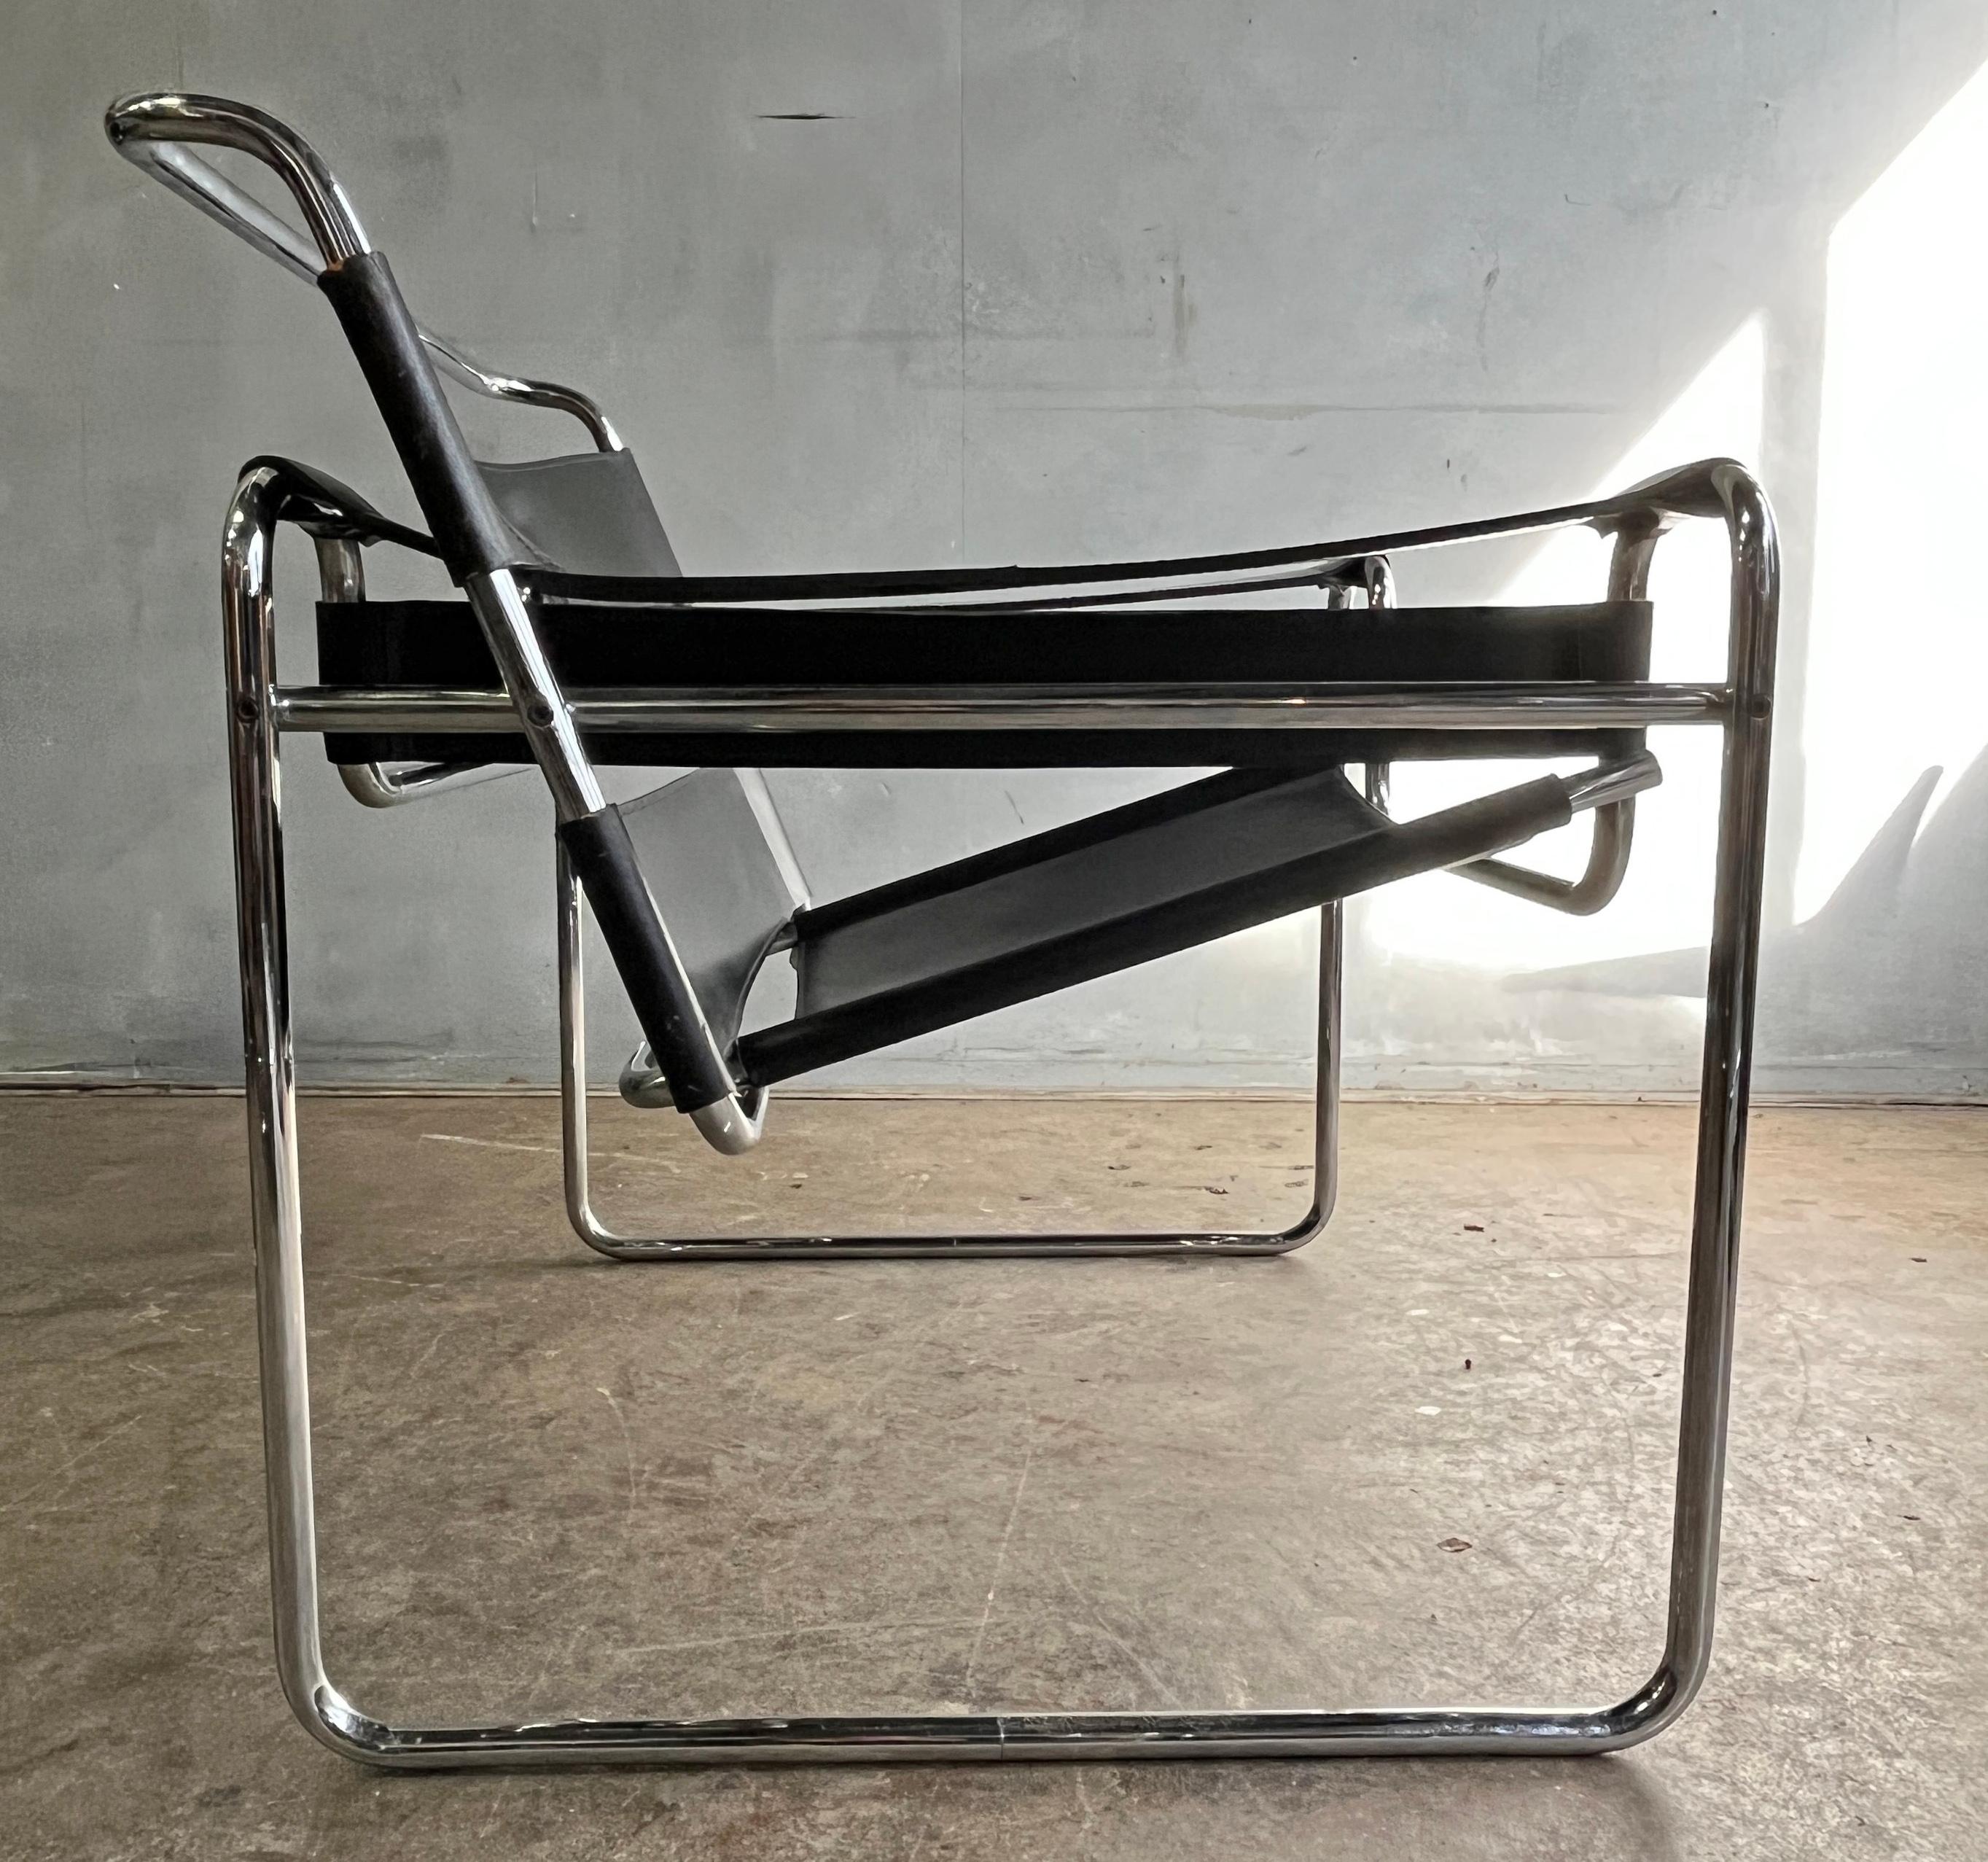 Wassily lounge chair designed by Marcel Breuer in black full leather. This vintage chair has the traits for authenticity verification such as flat caps on the end tubes, black hex screws, and thick cowhide leather. 

Marcel Breuer's 1925 iconic